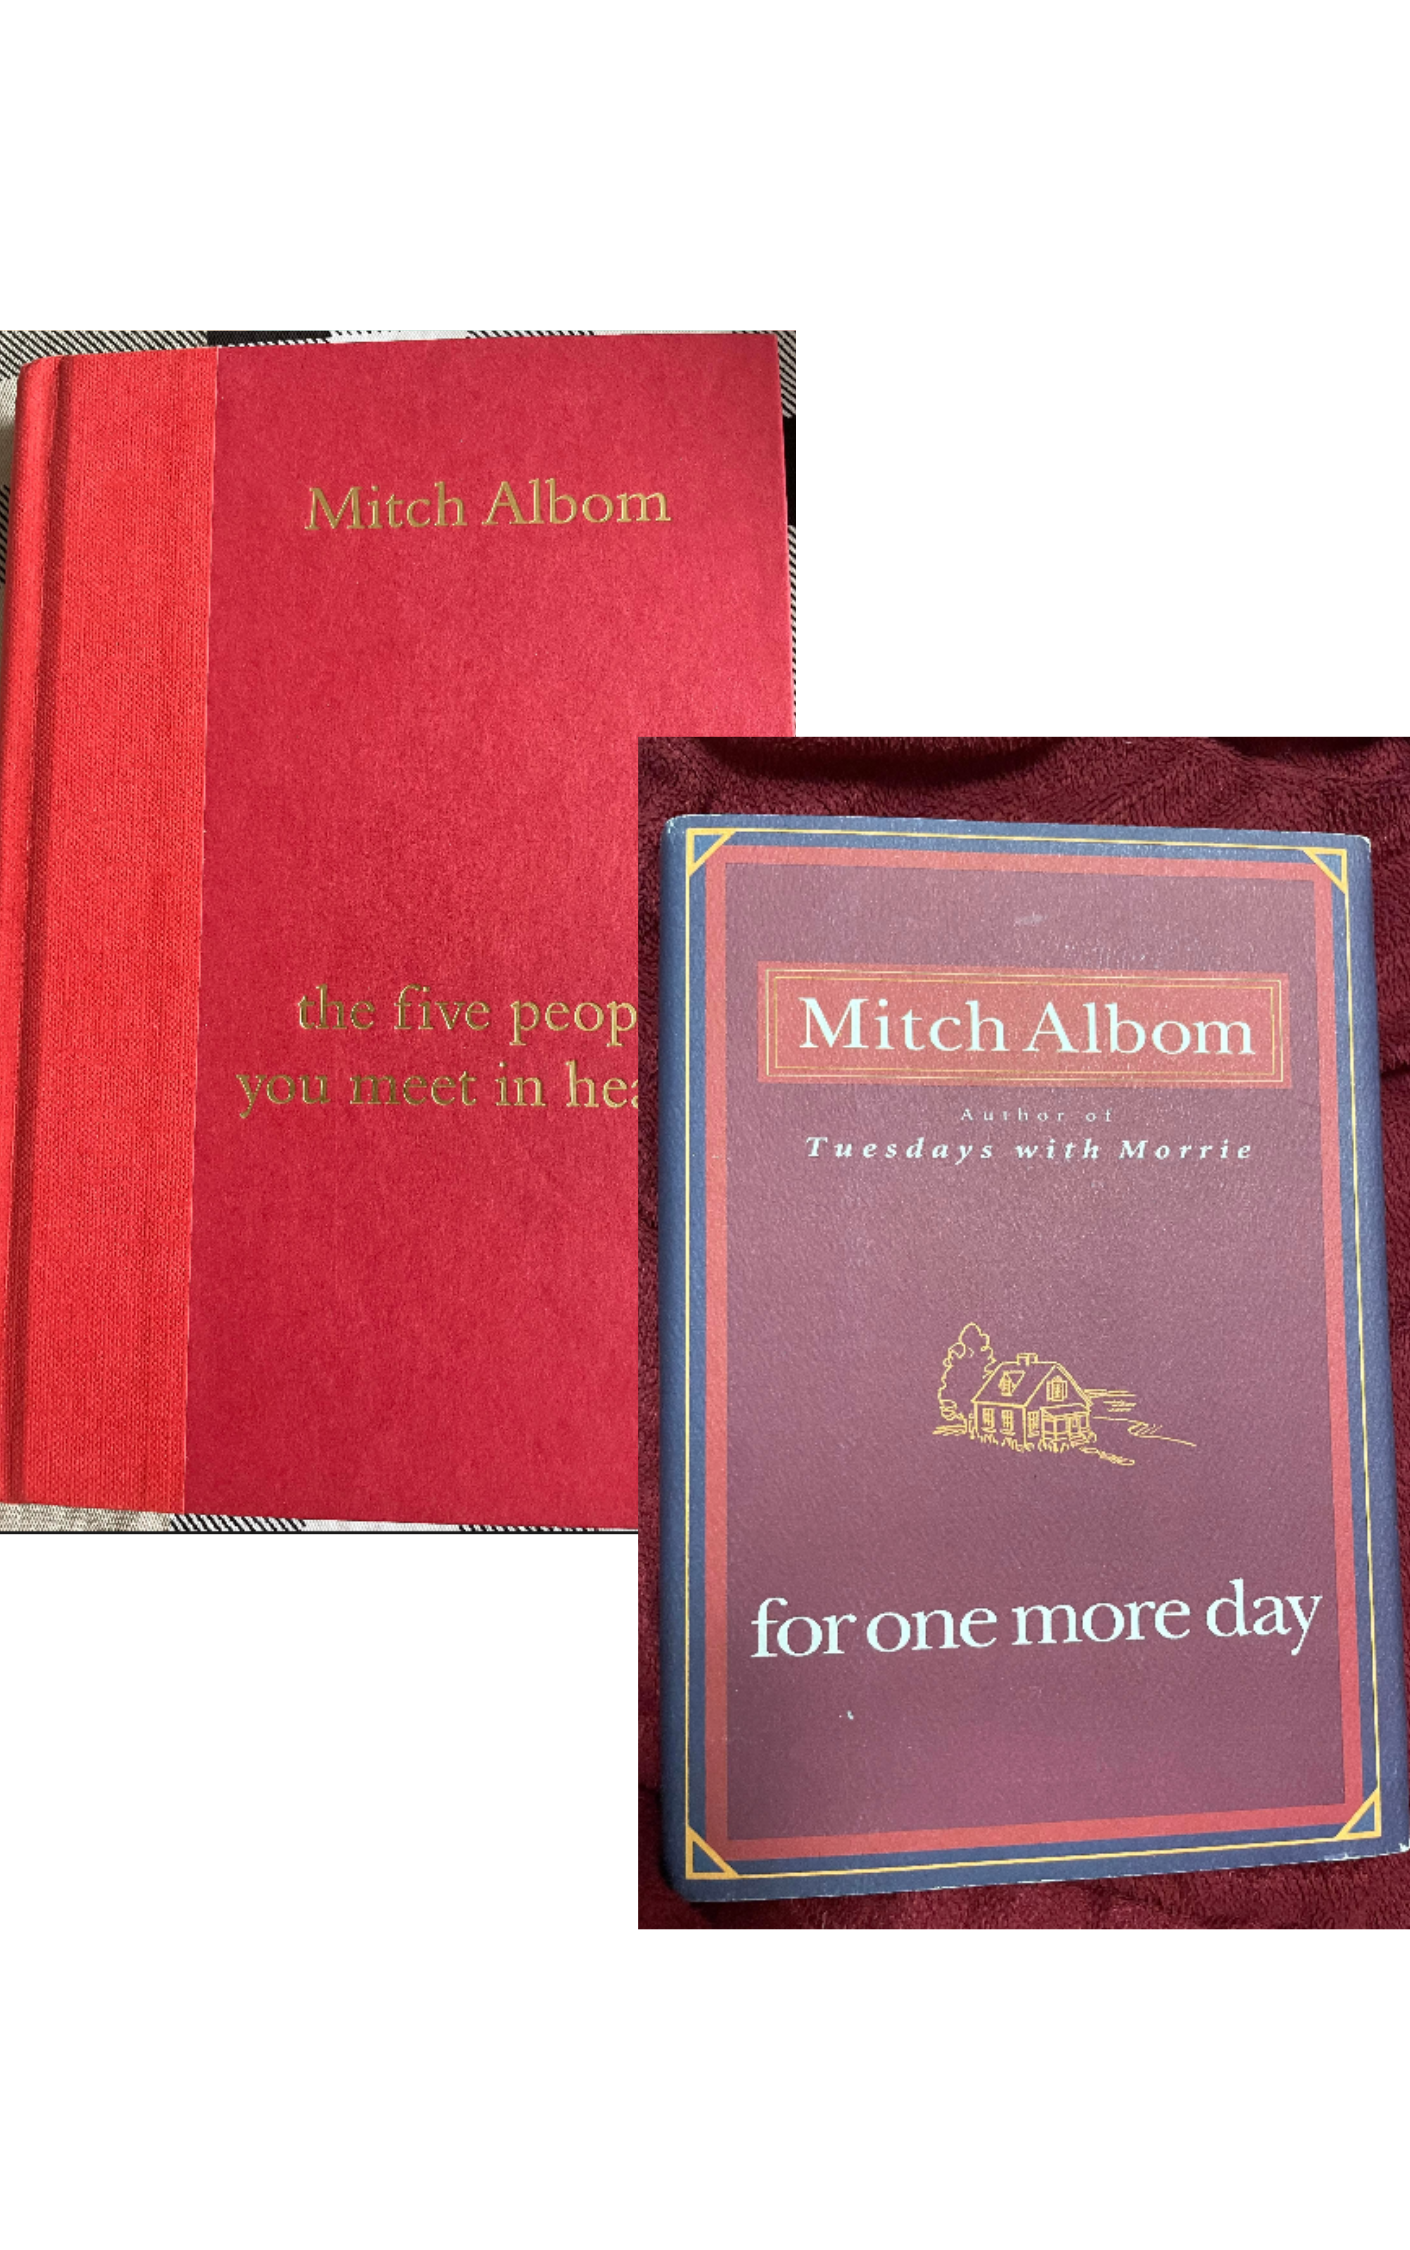 Mitch Albom Collection - 2 Books: The Five People You Meet in Heaven & For One More Day (Hardcover)